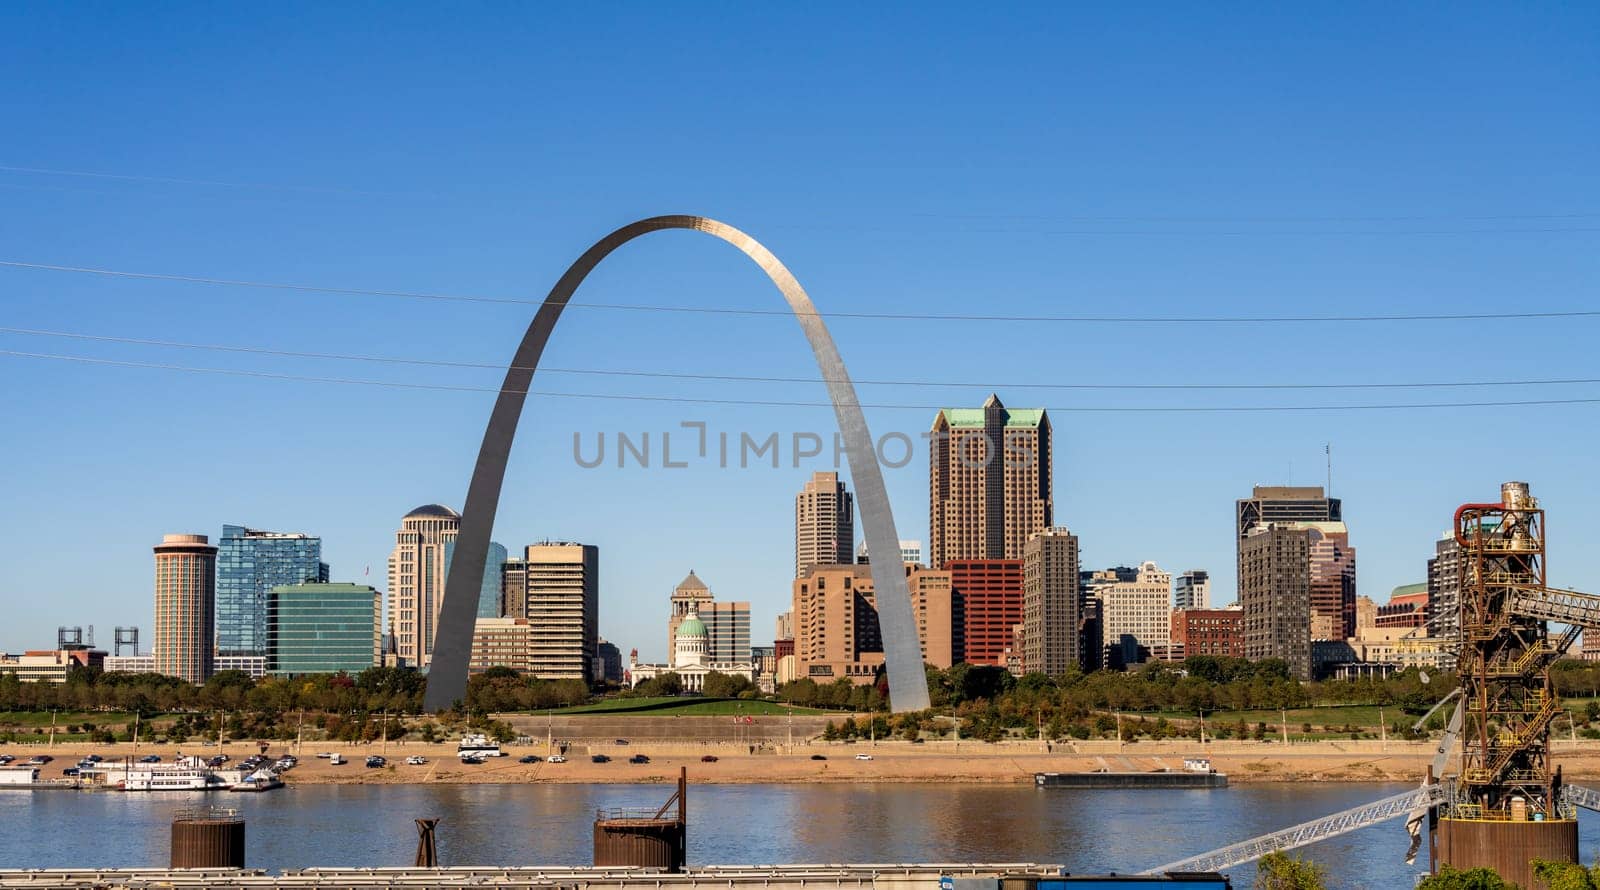 Low water levels in Mississippi river give unusual view of the Gateway arch towering over the riverbank from overlook in Illinois